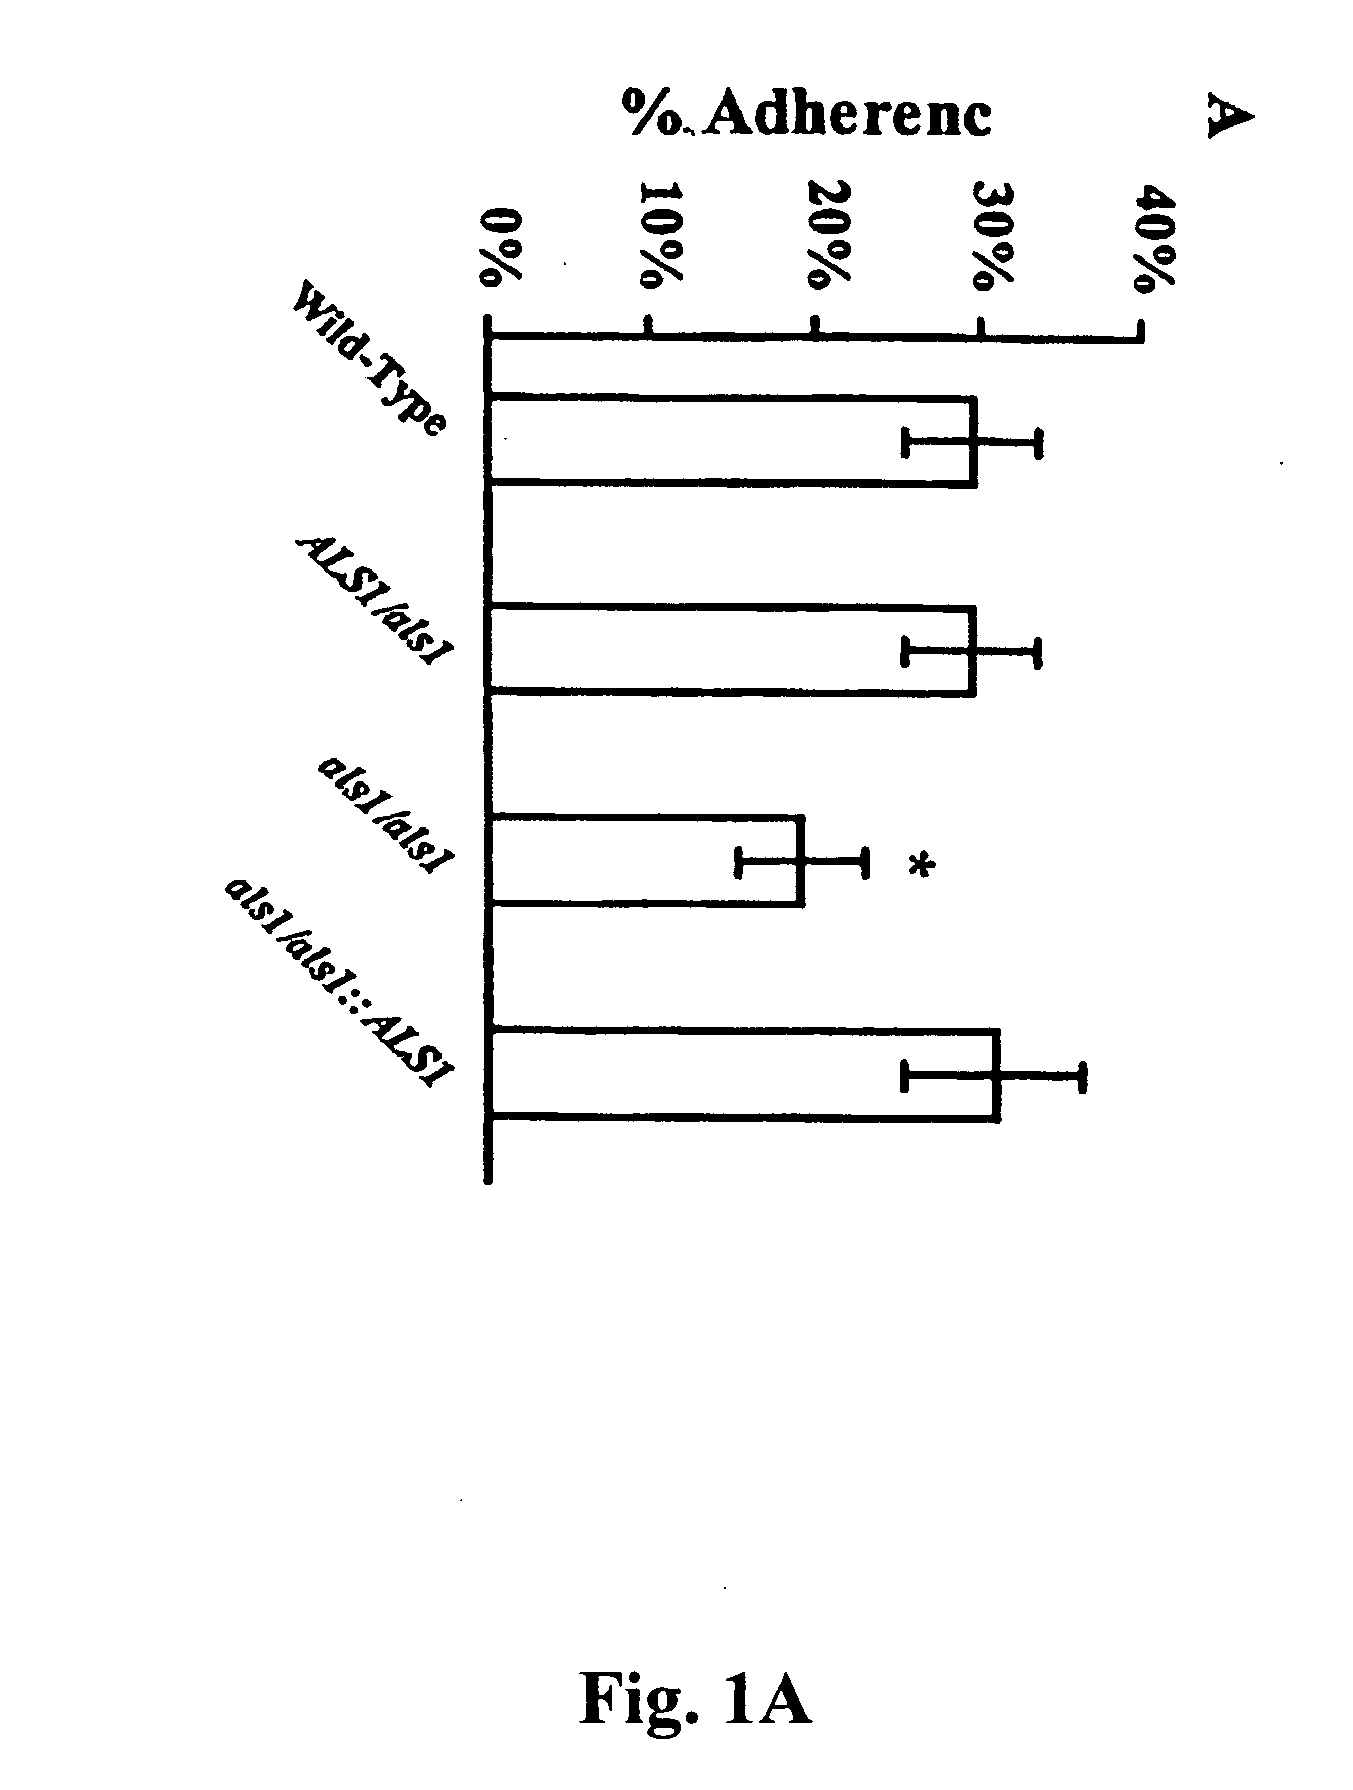 Pharmaceutical compositions and methods to vaccinate against disseminated candidiasis